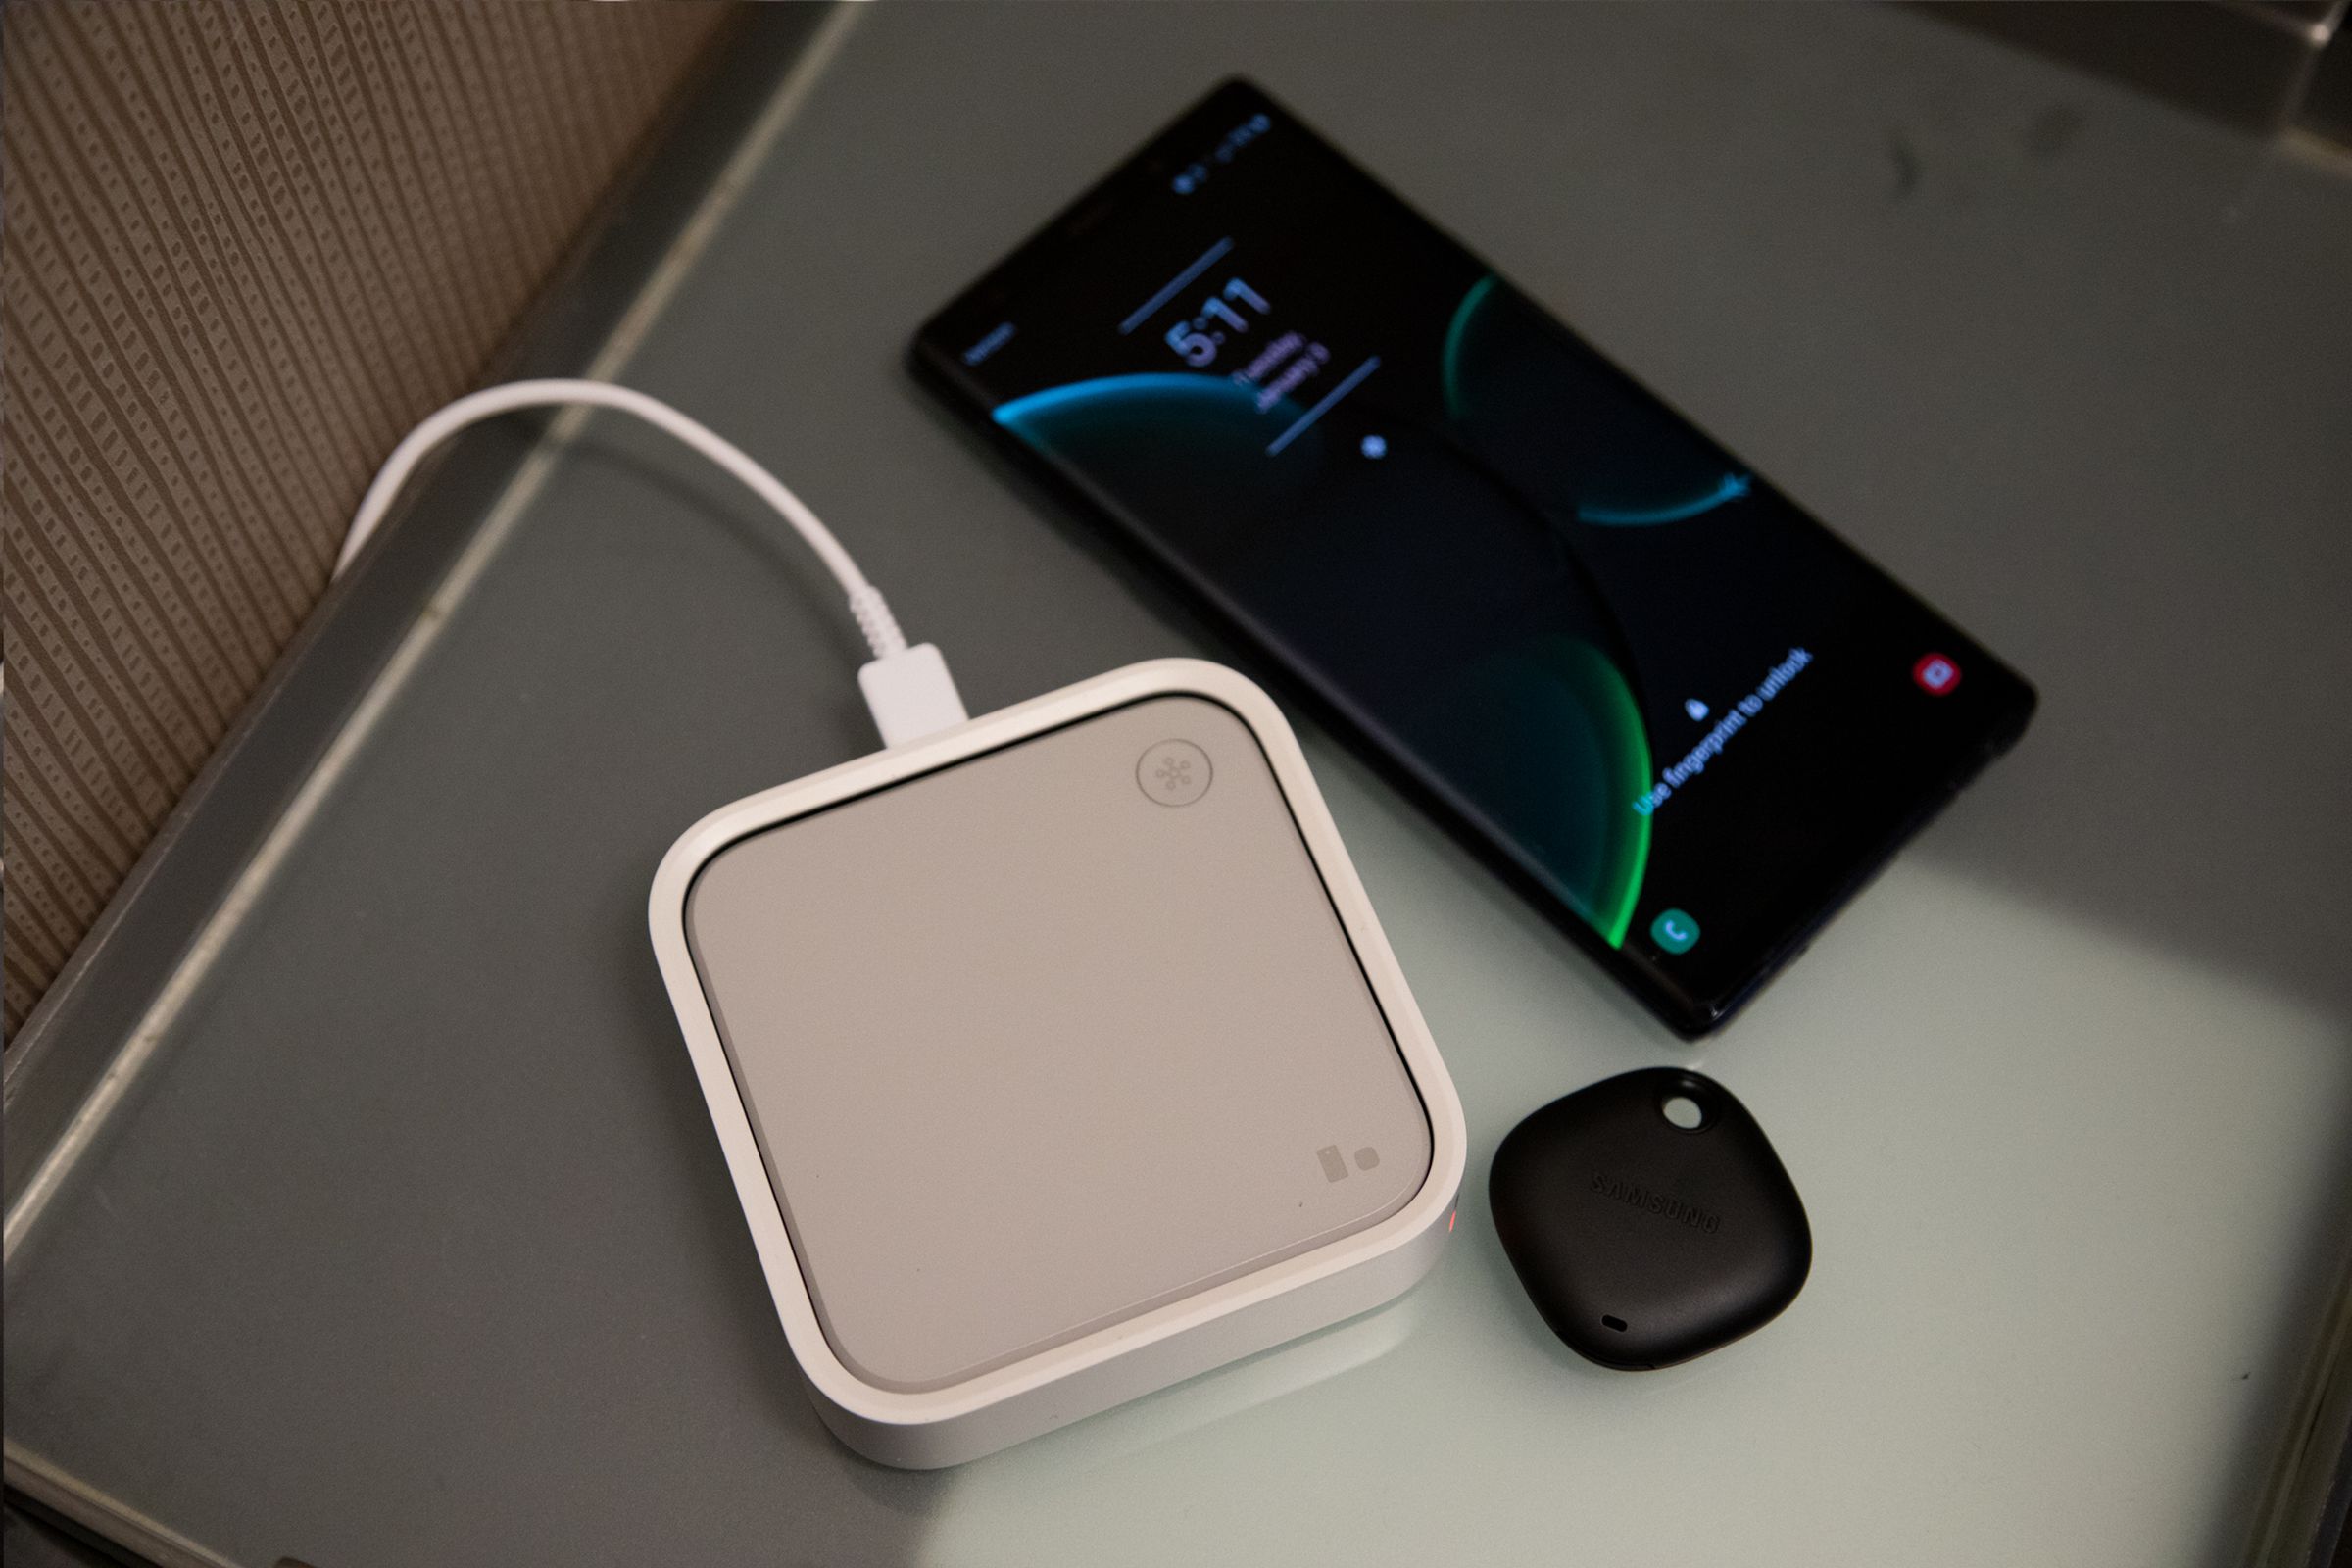 A grey and white wireless charging pad on a table next to a Galaxy phone and a black Galaxy tag.